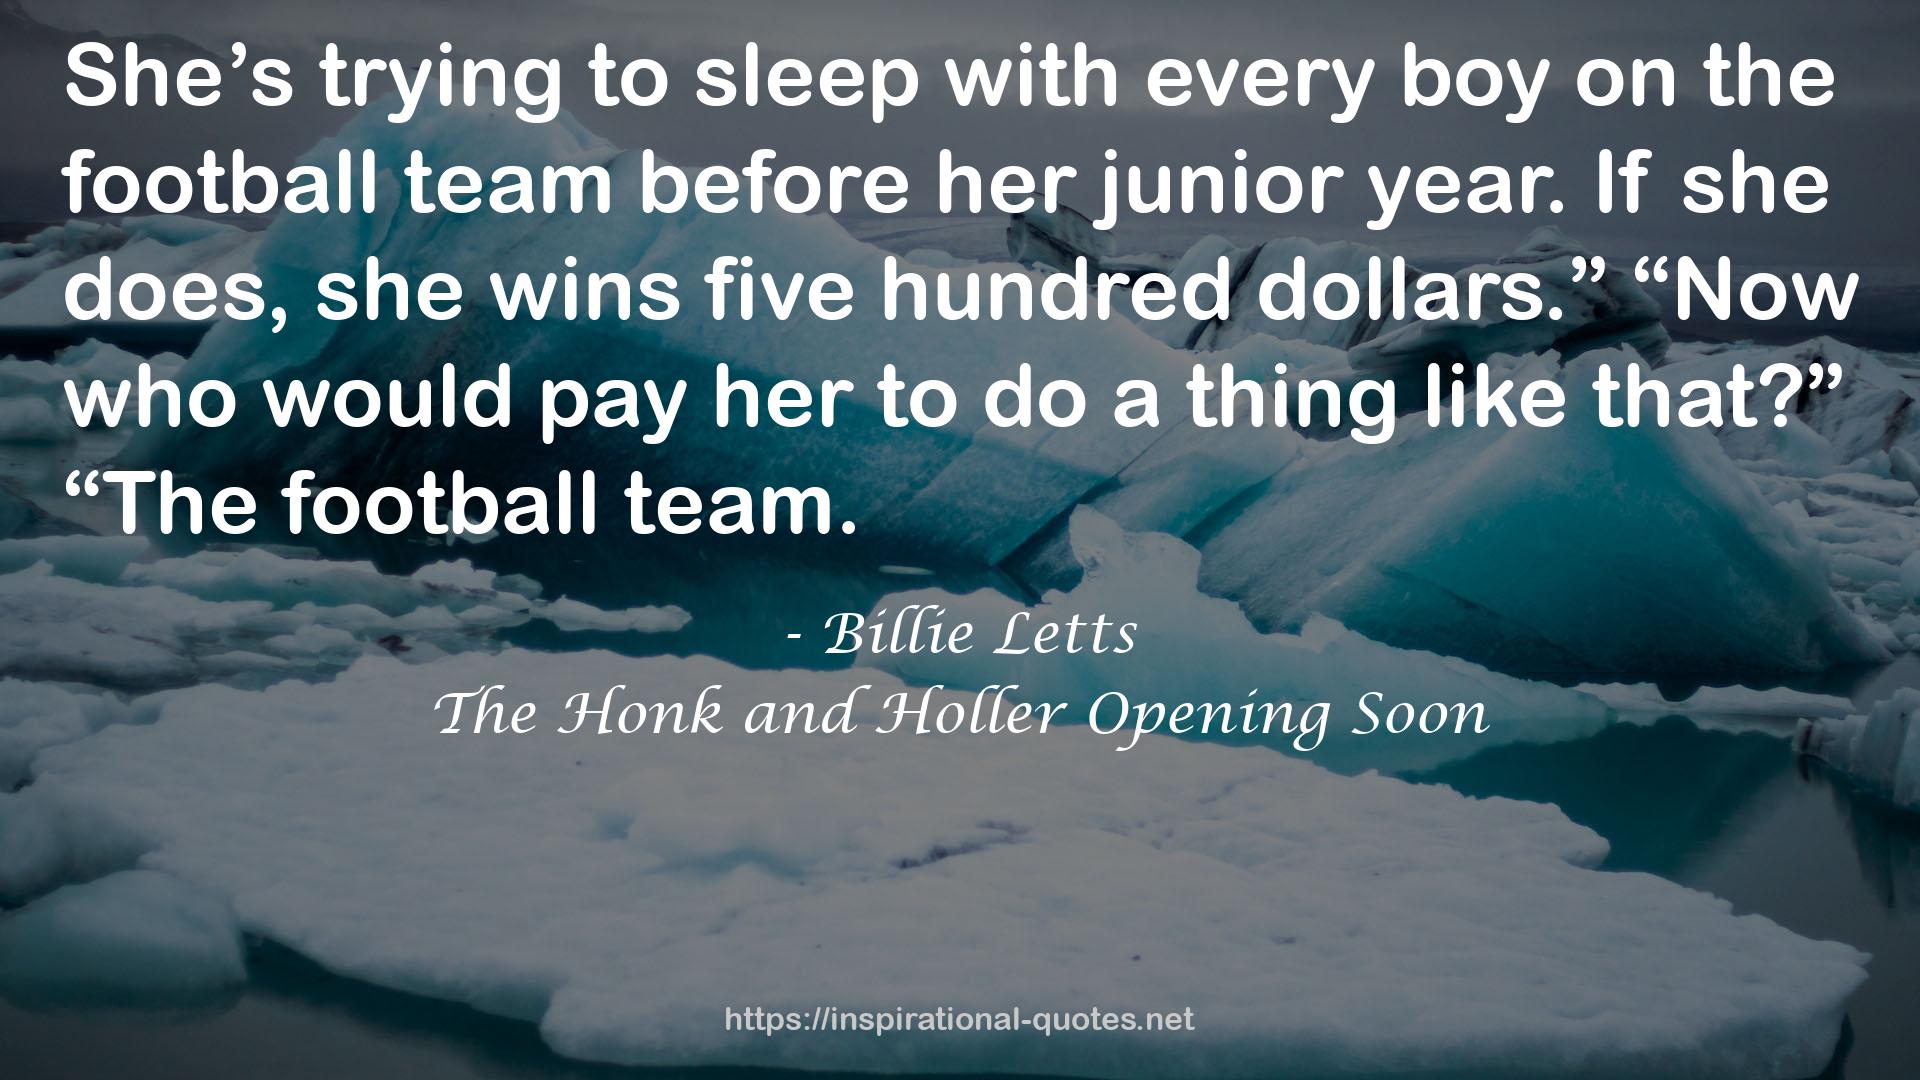 The Honk and Holler Opening Soon QUOTES